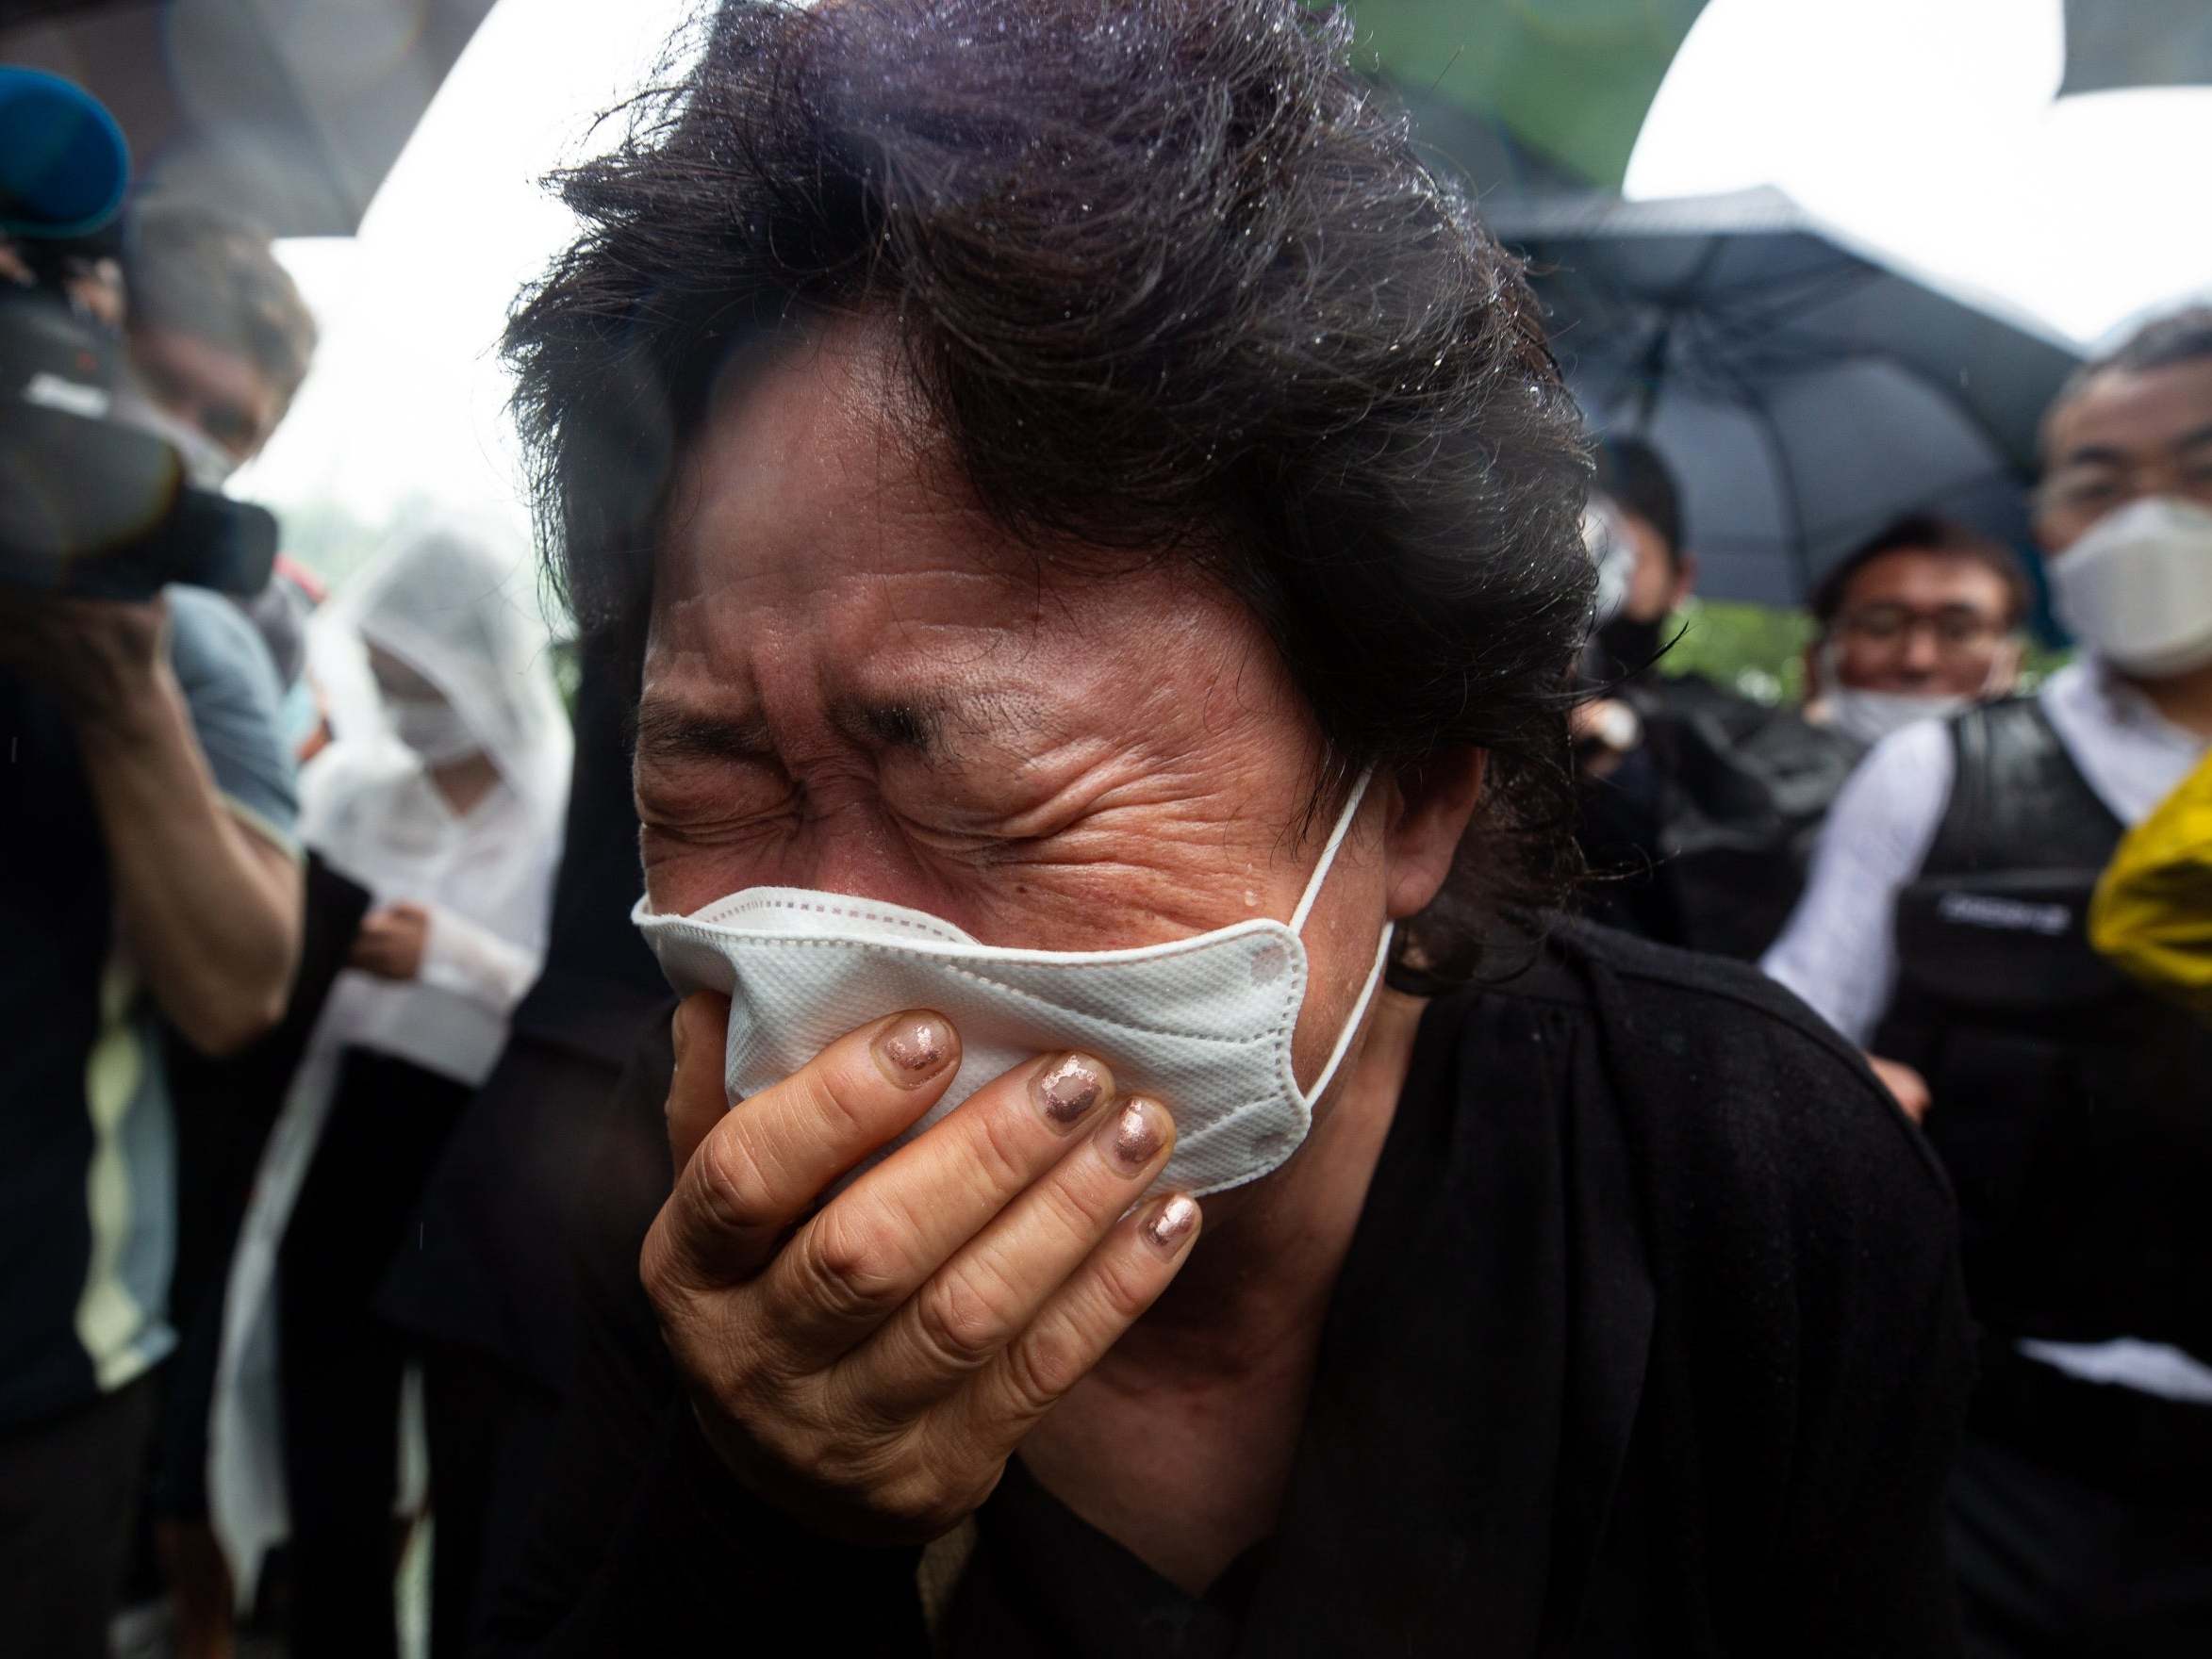 A mourner weeps during the funeral ceremony for late Seoul mayor Park Won-soon, outside Seoul City Hall in Seoul, South Korea, 13 July 2020.